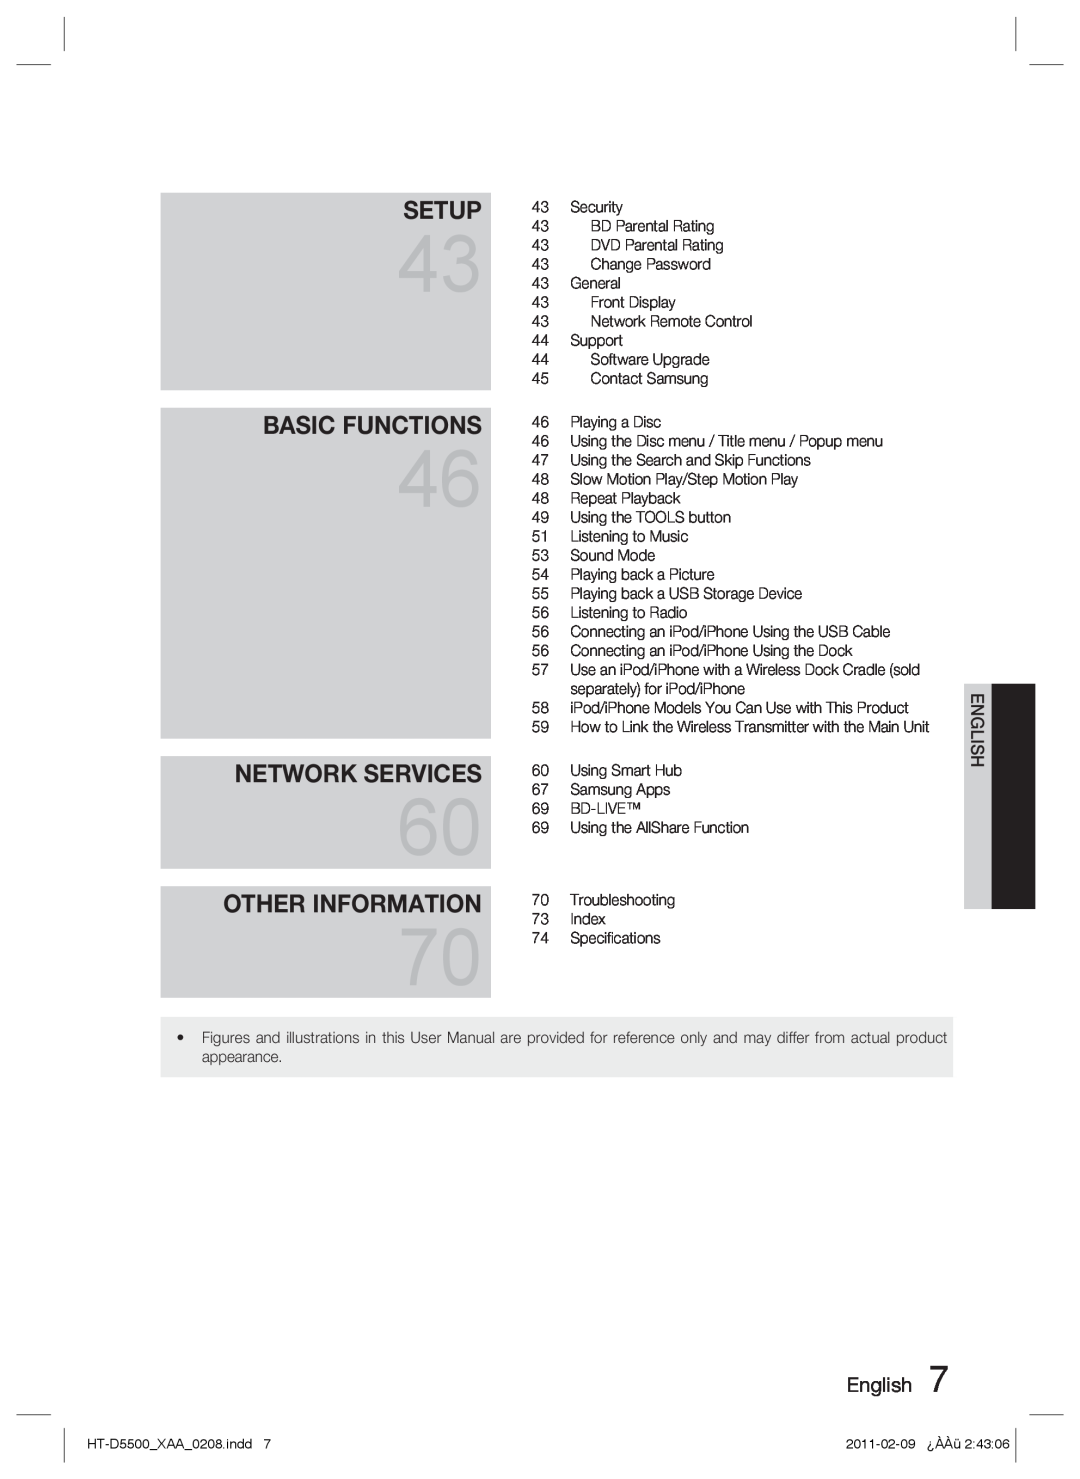 Samsung D5500 user manual Basic Functions, Network Services, Other Information, Setup, English 